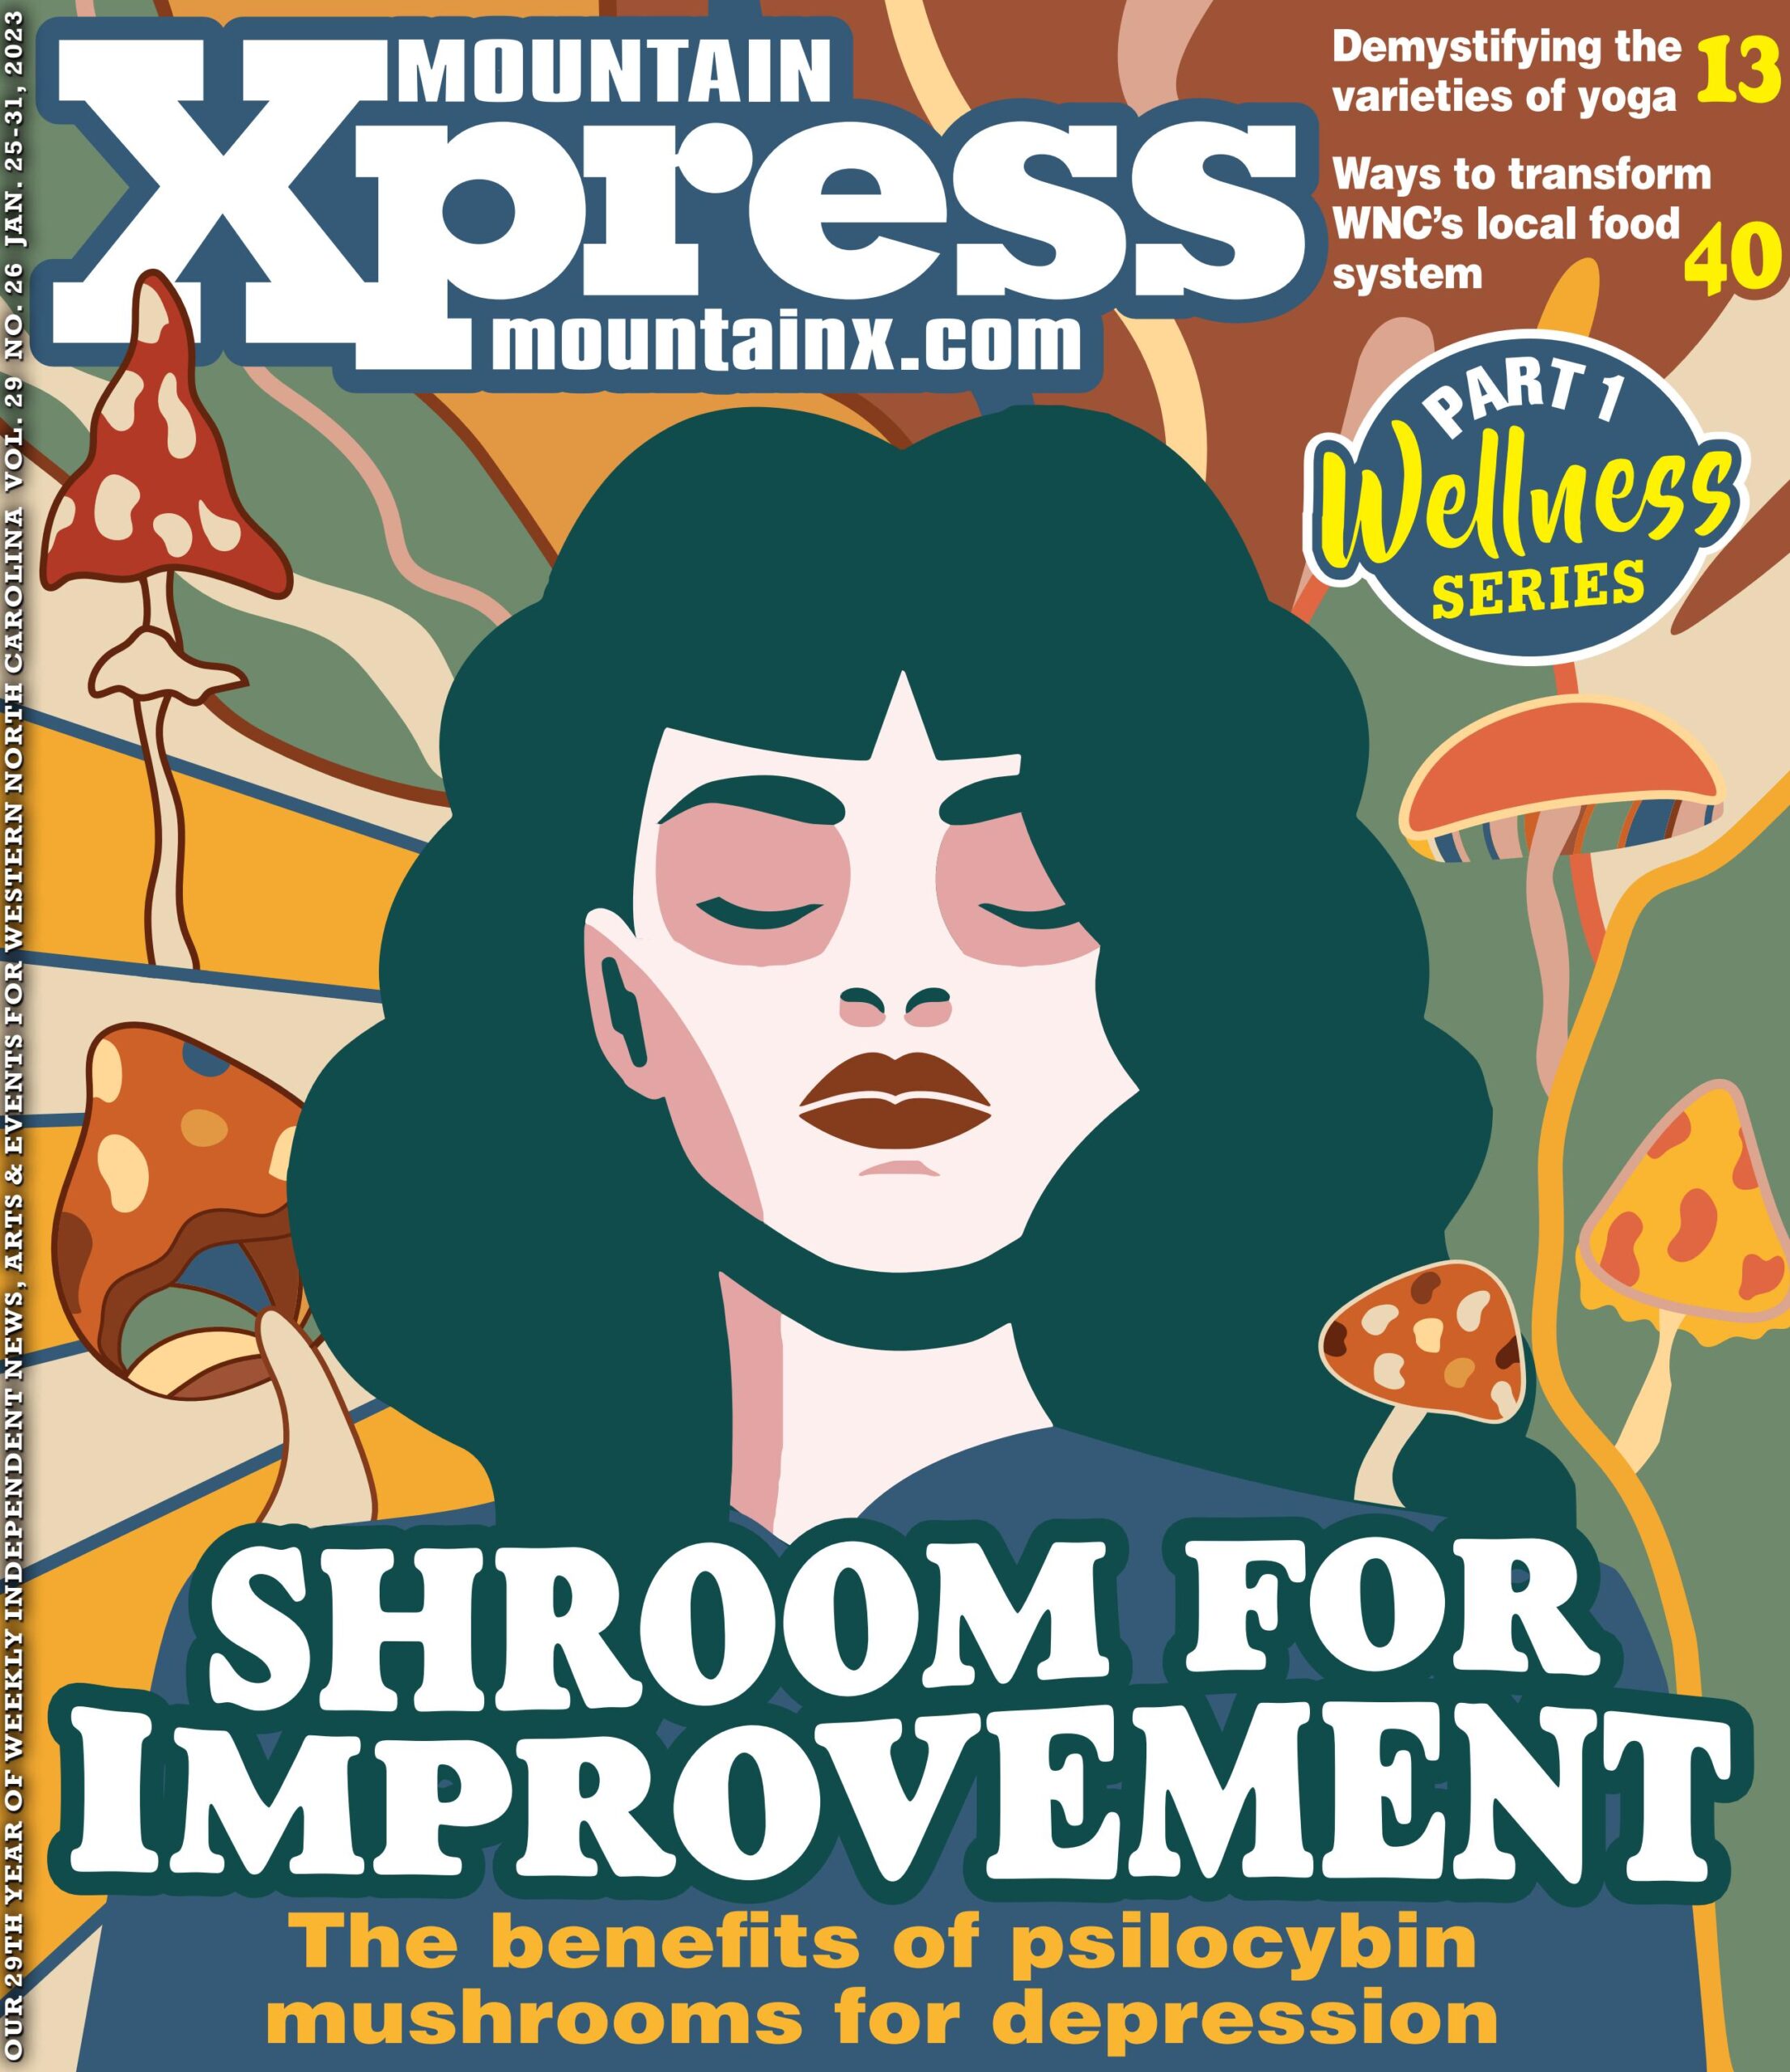 Shroom for Improvement” in the Mountain Xpress - The SpArc